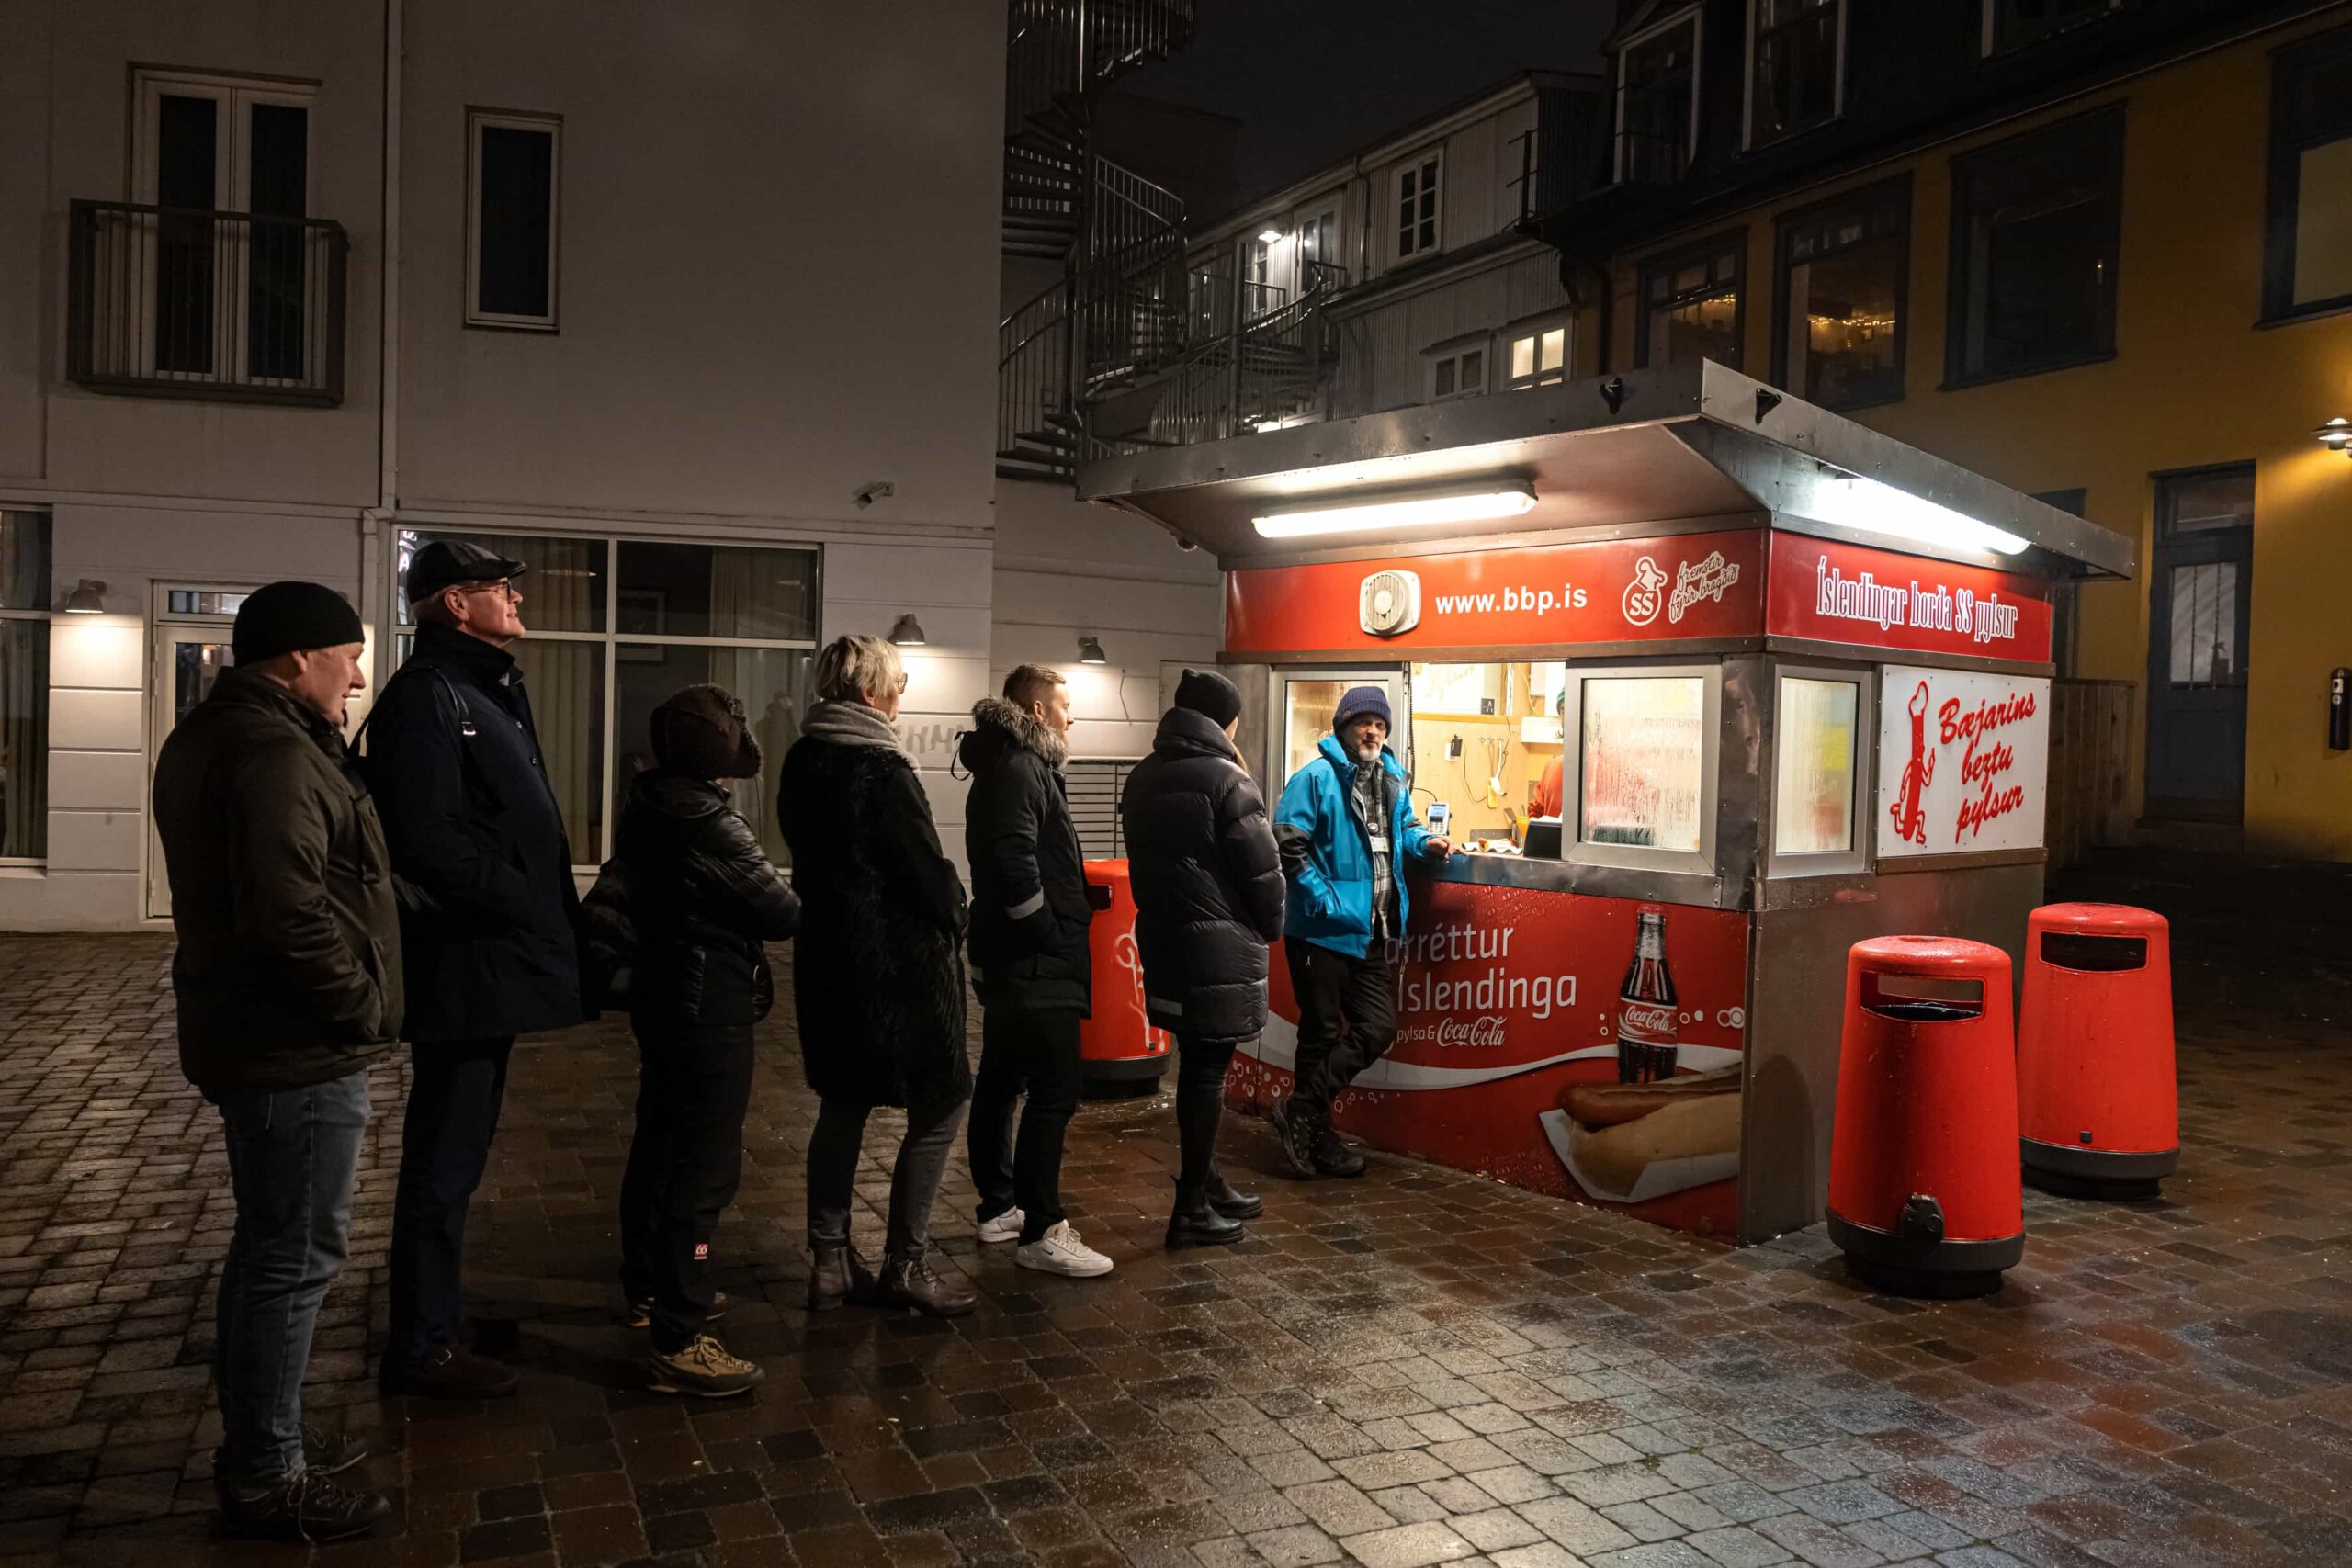 A queue in front of the most famous Hot Dog stand in Iceland